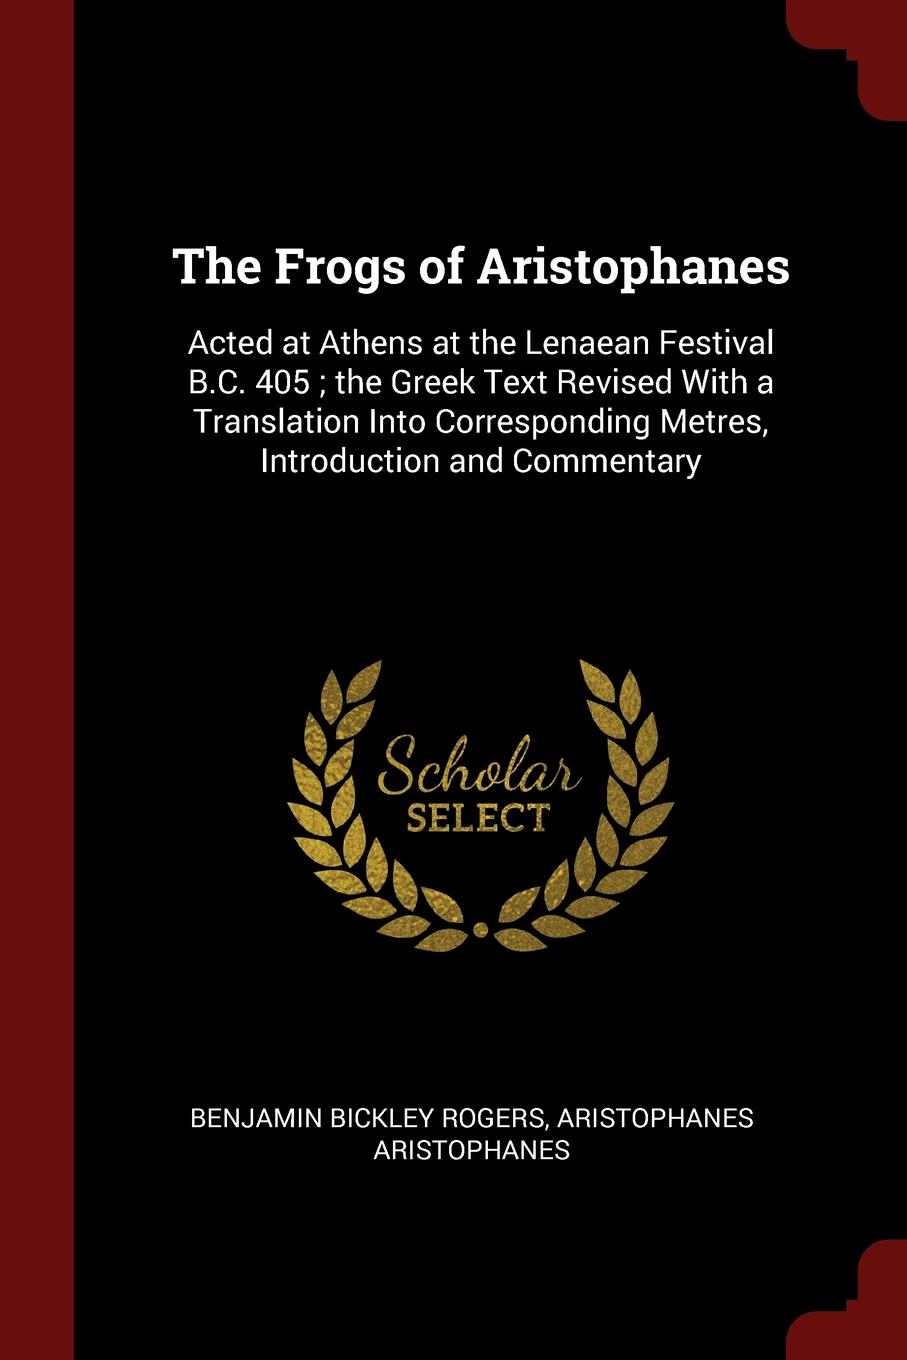 The Frogs of Aristophanes. Acted at Athens at the Lenaean Festival B.C. 405 ; the Greek Text Revised With a Translation Into Corresponding Metres, Introduction and Commentary